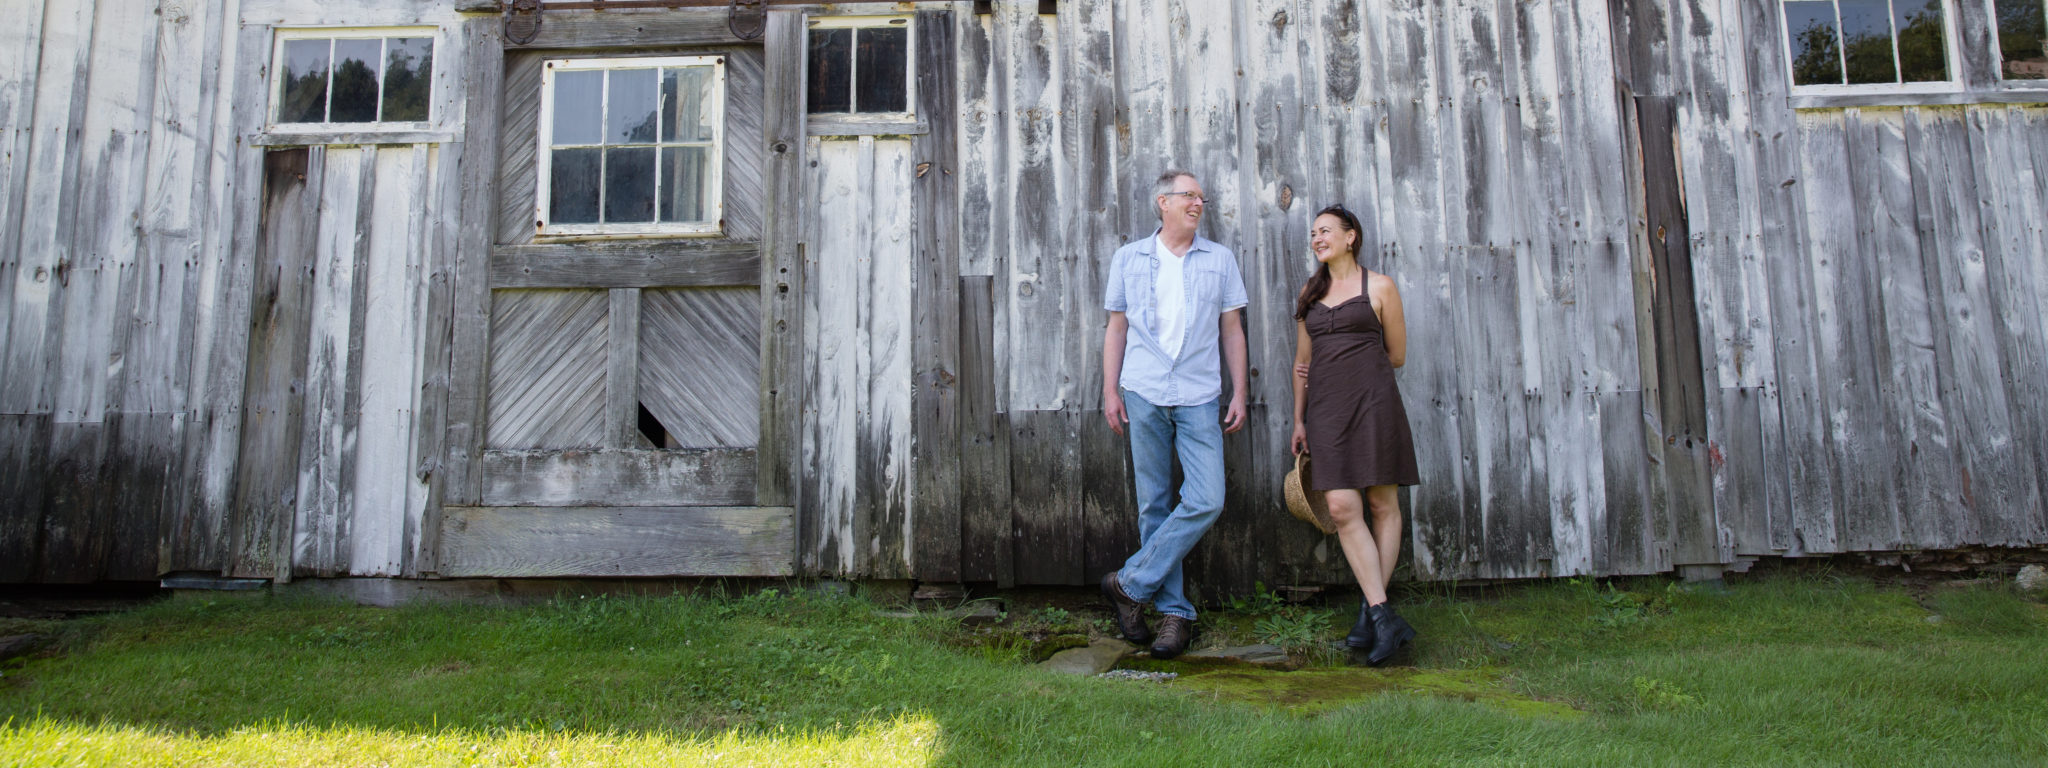 john singer and dar tavernier standing in front of a wooden barn